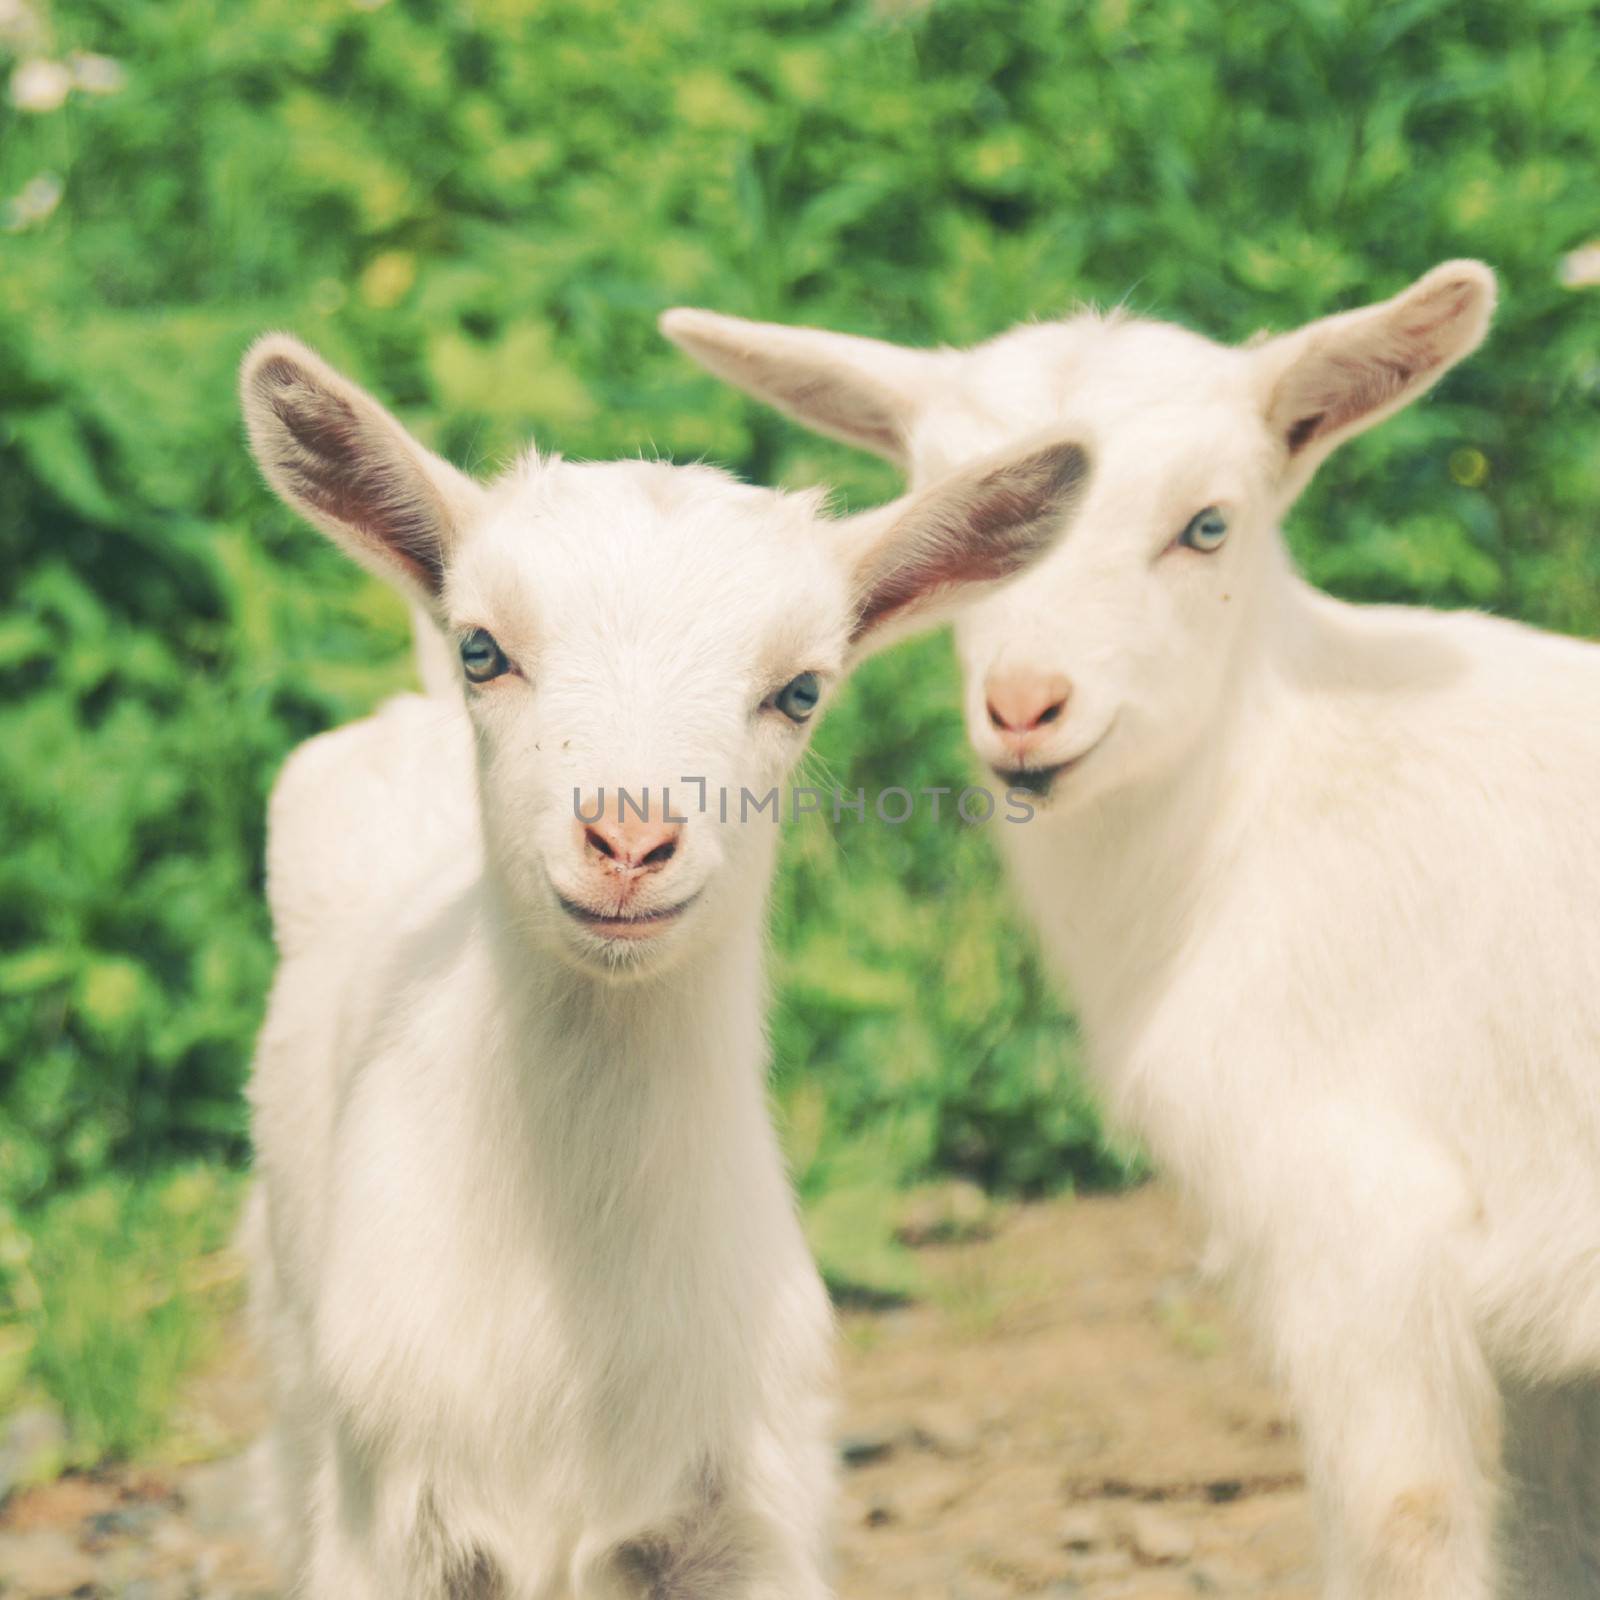 smiling little goats with retro filter effect by nuchylee